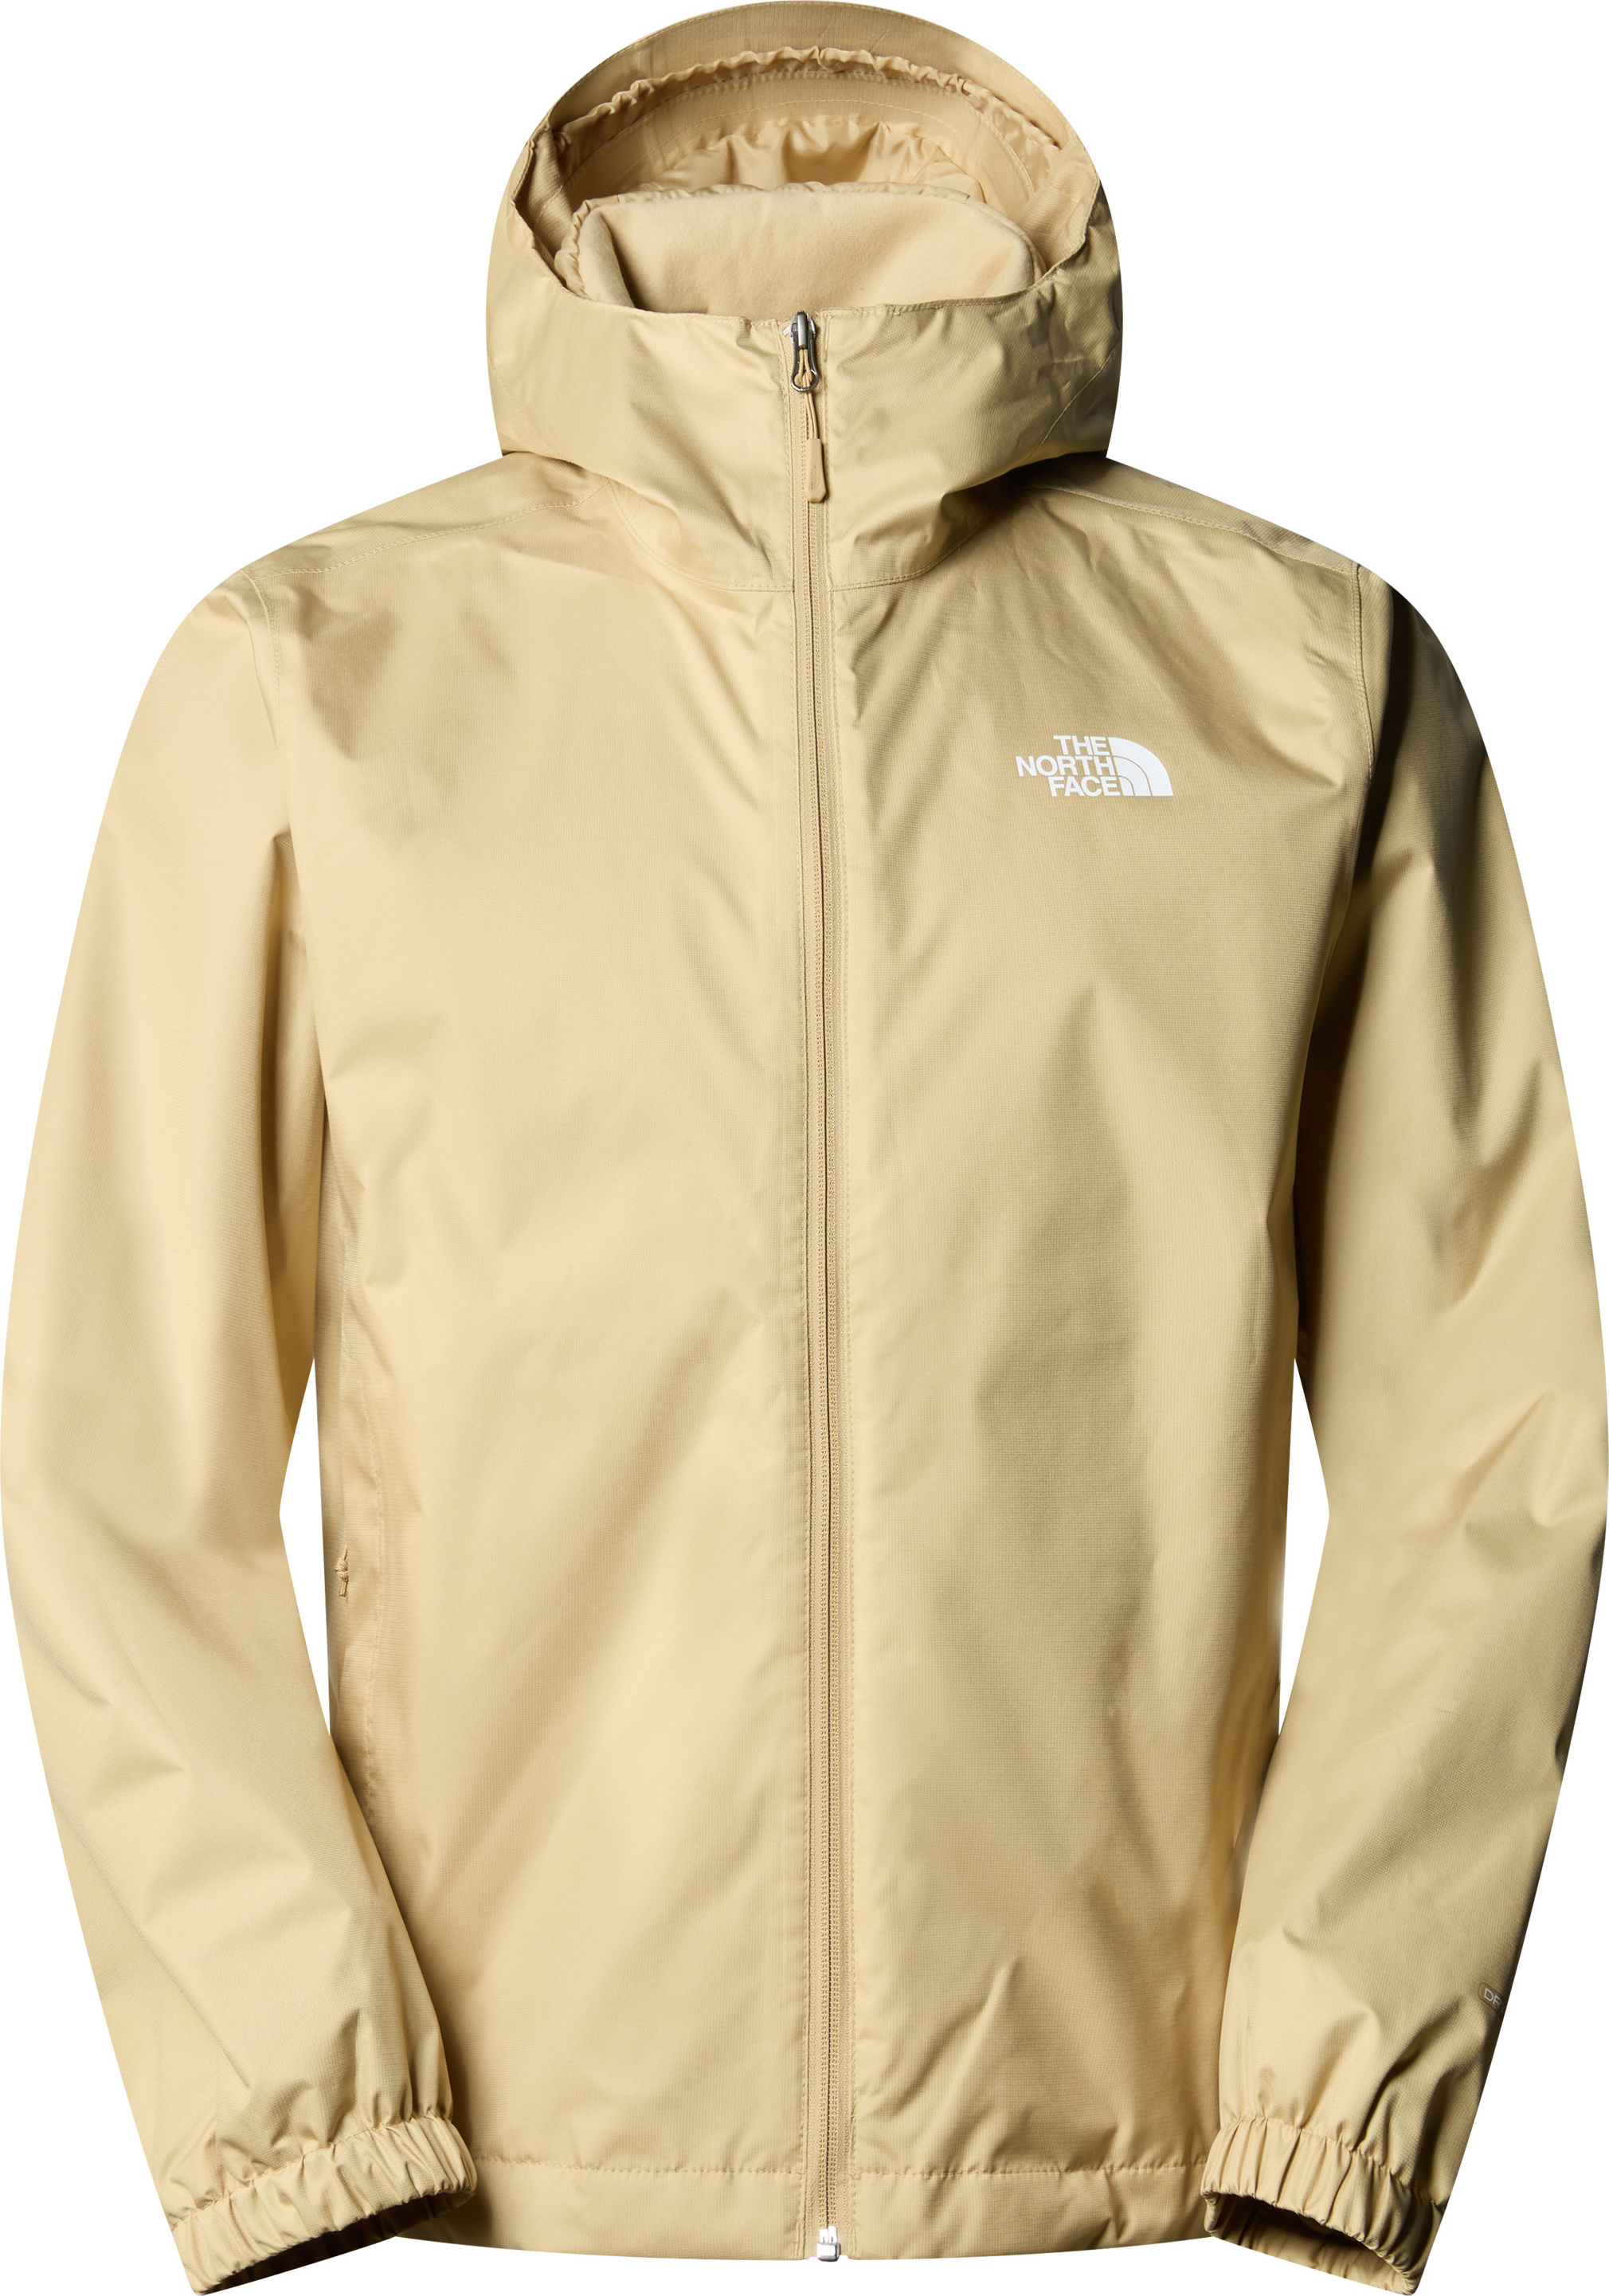 The North Face Men’s Quest Hooded Jacket Khaki Stone